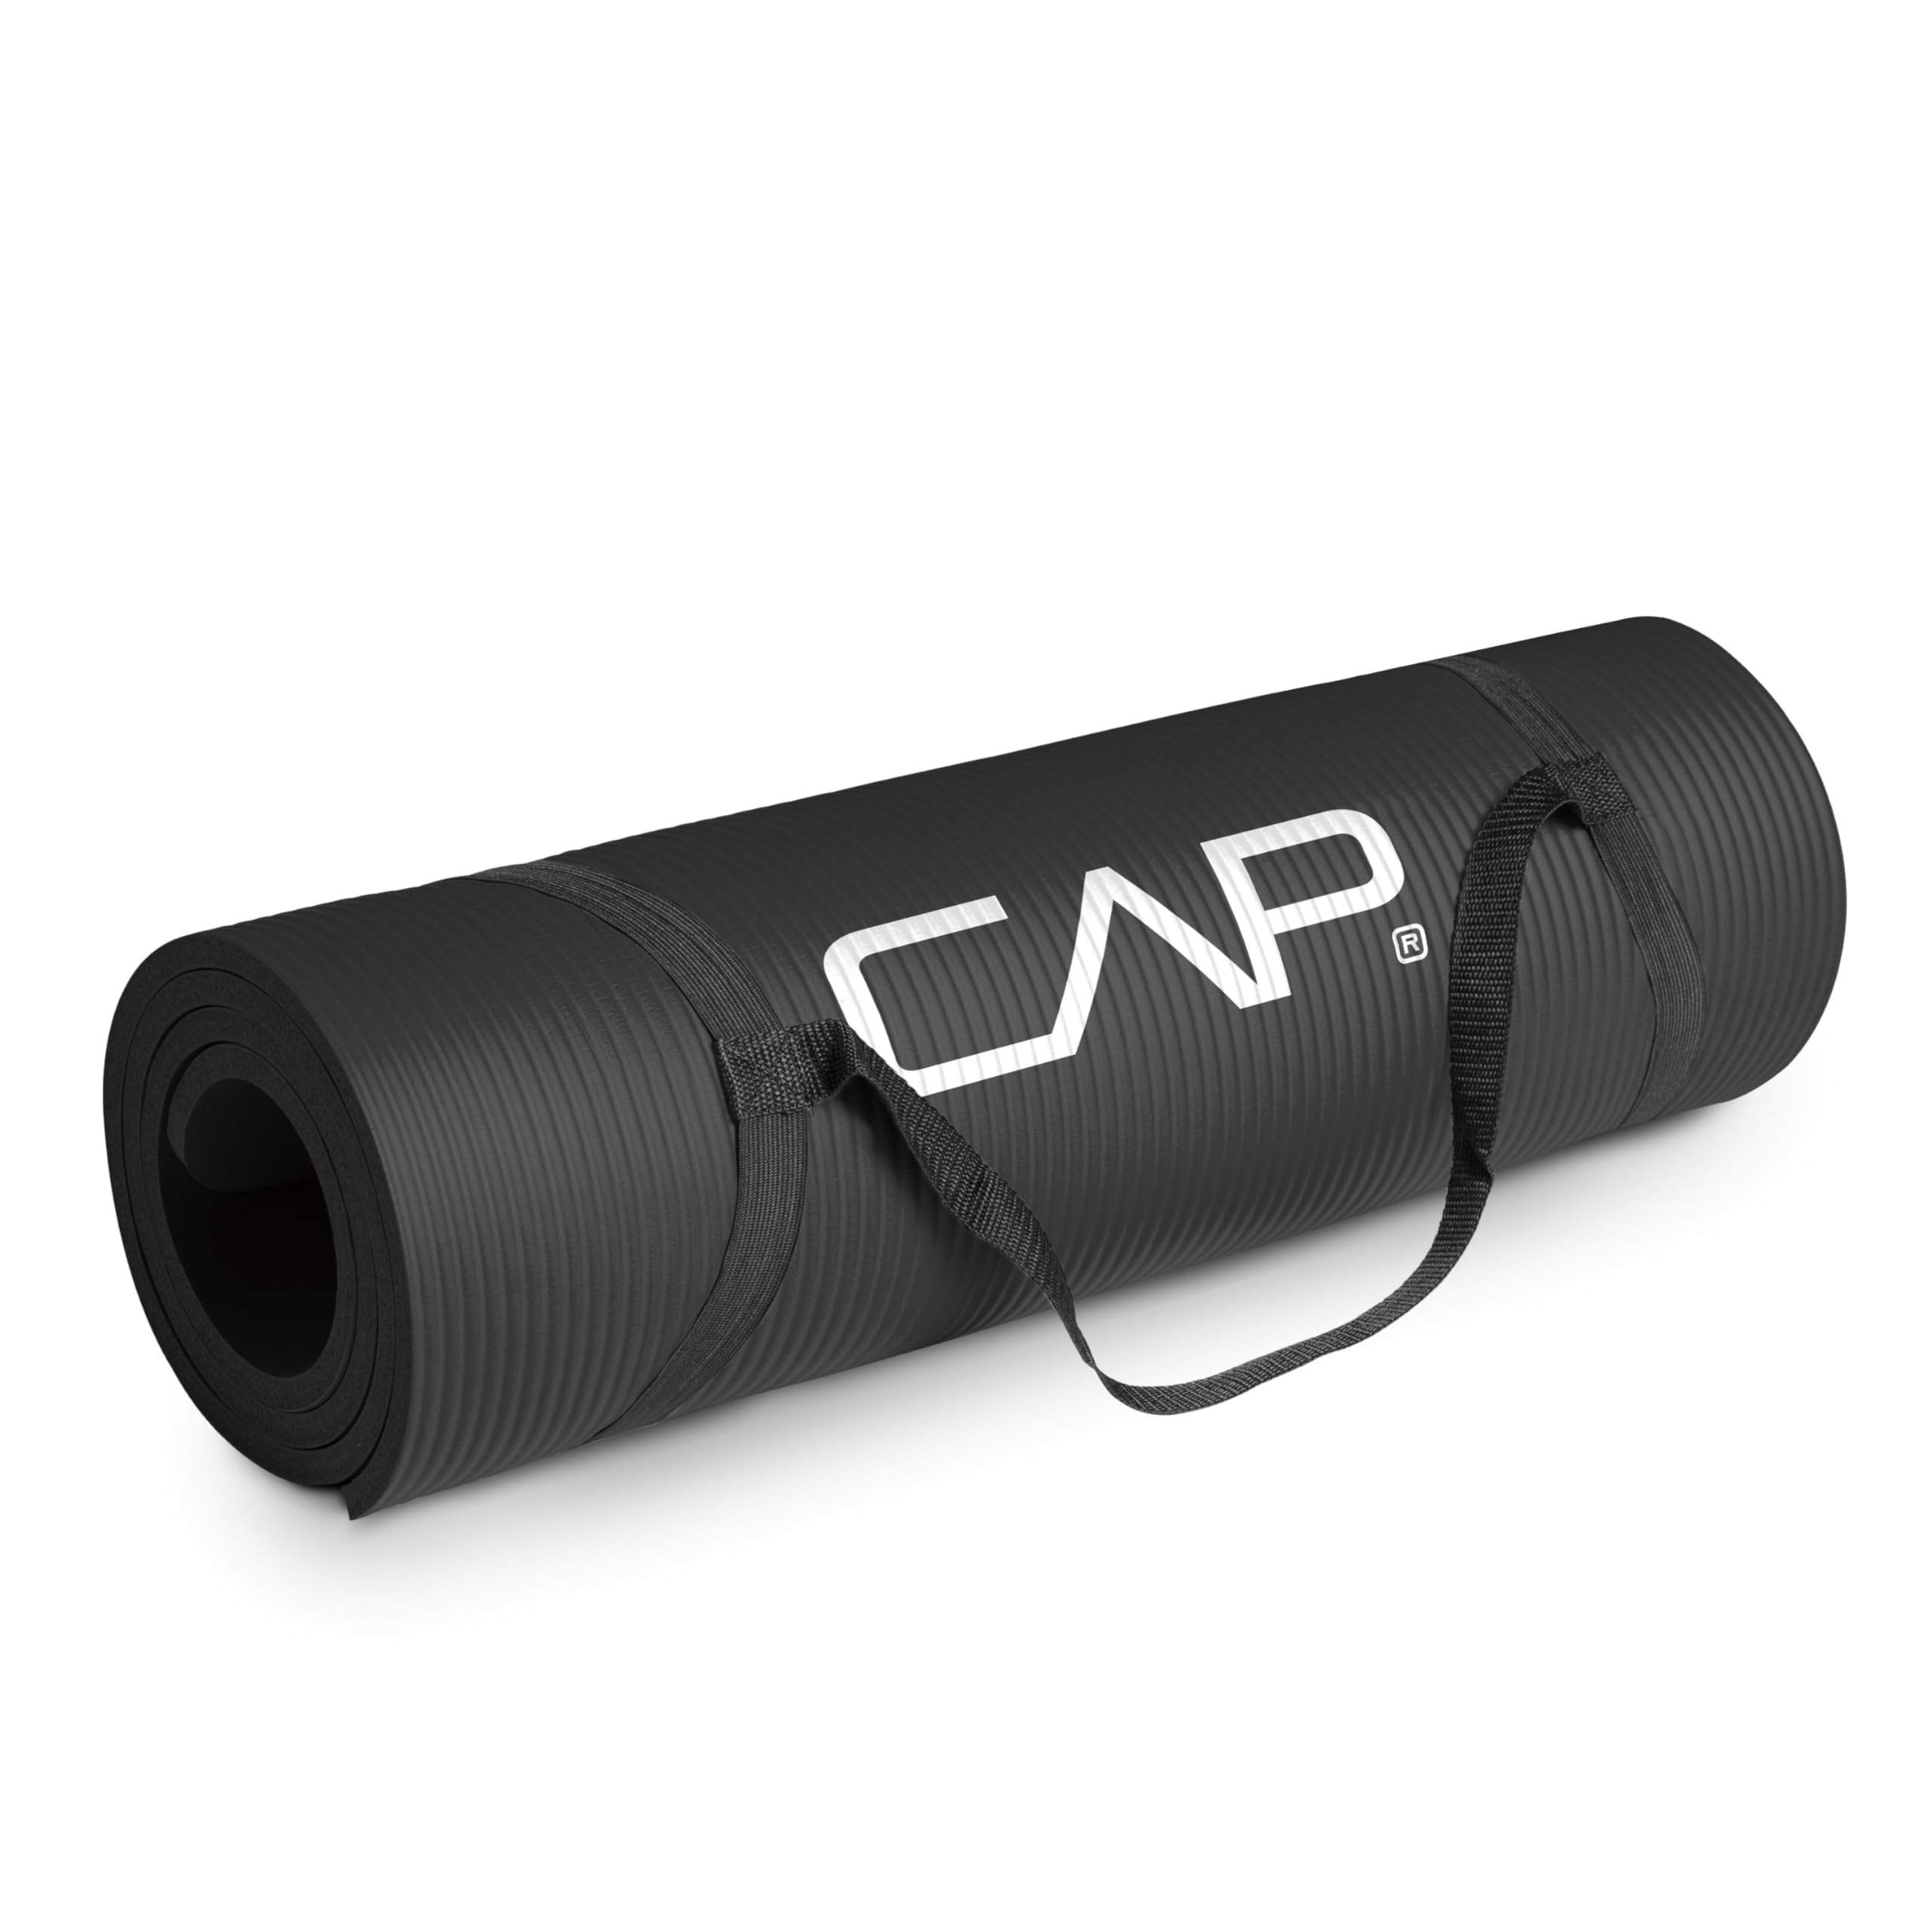 CAP Barbell High Density Exercise Mat with strap | Multiple options